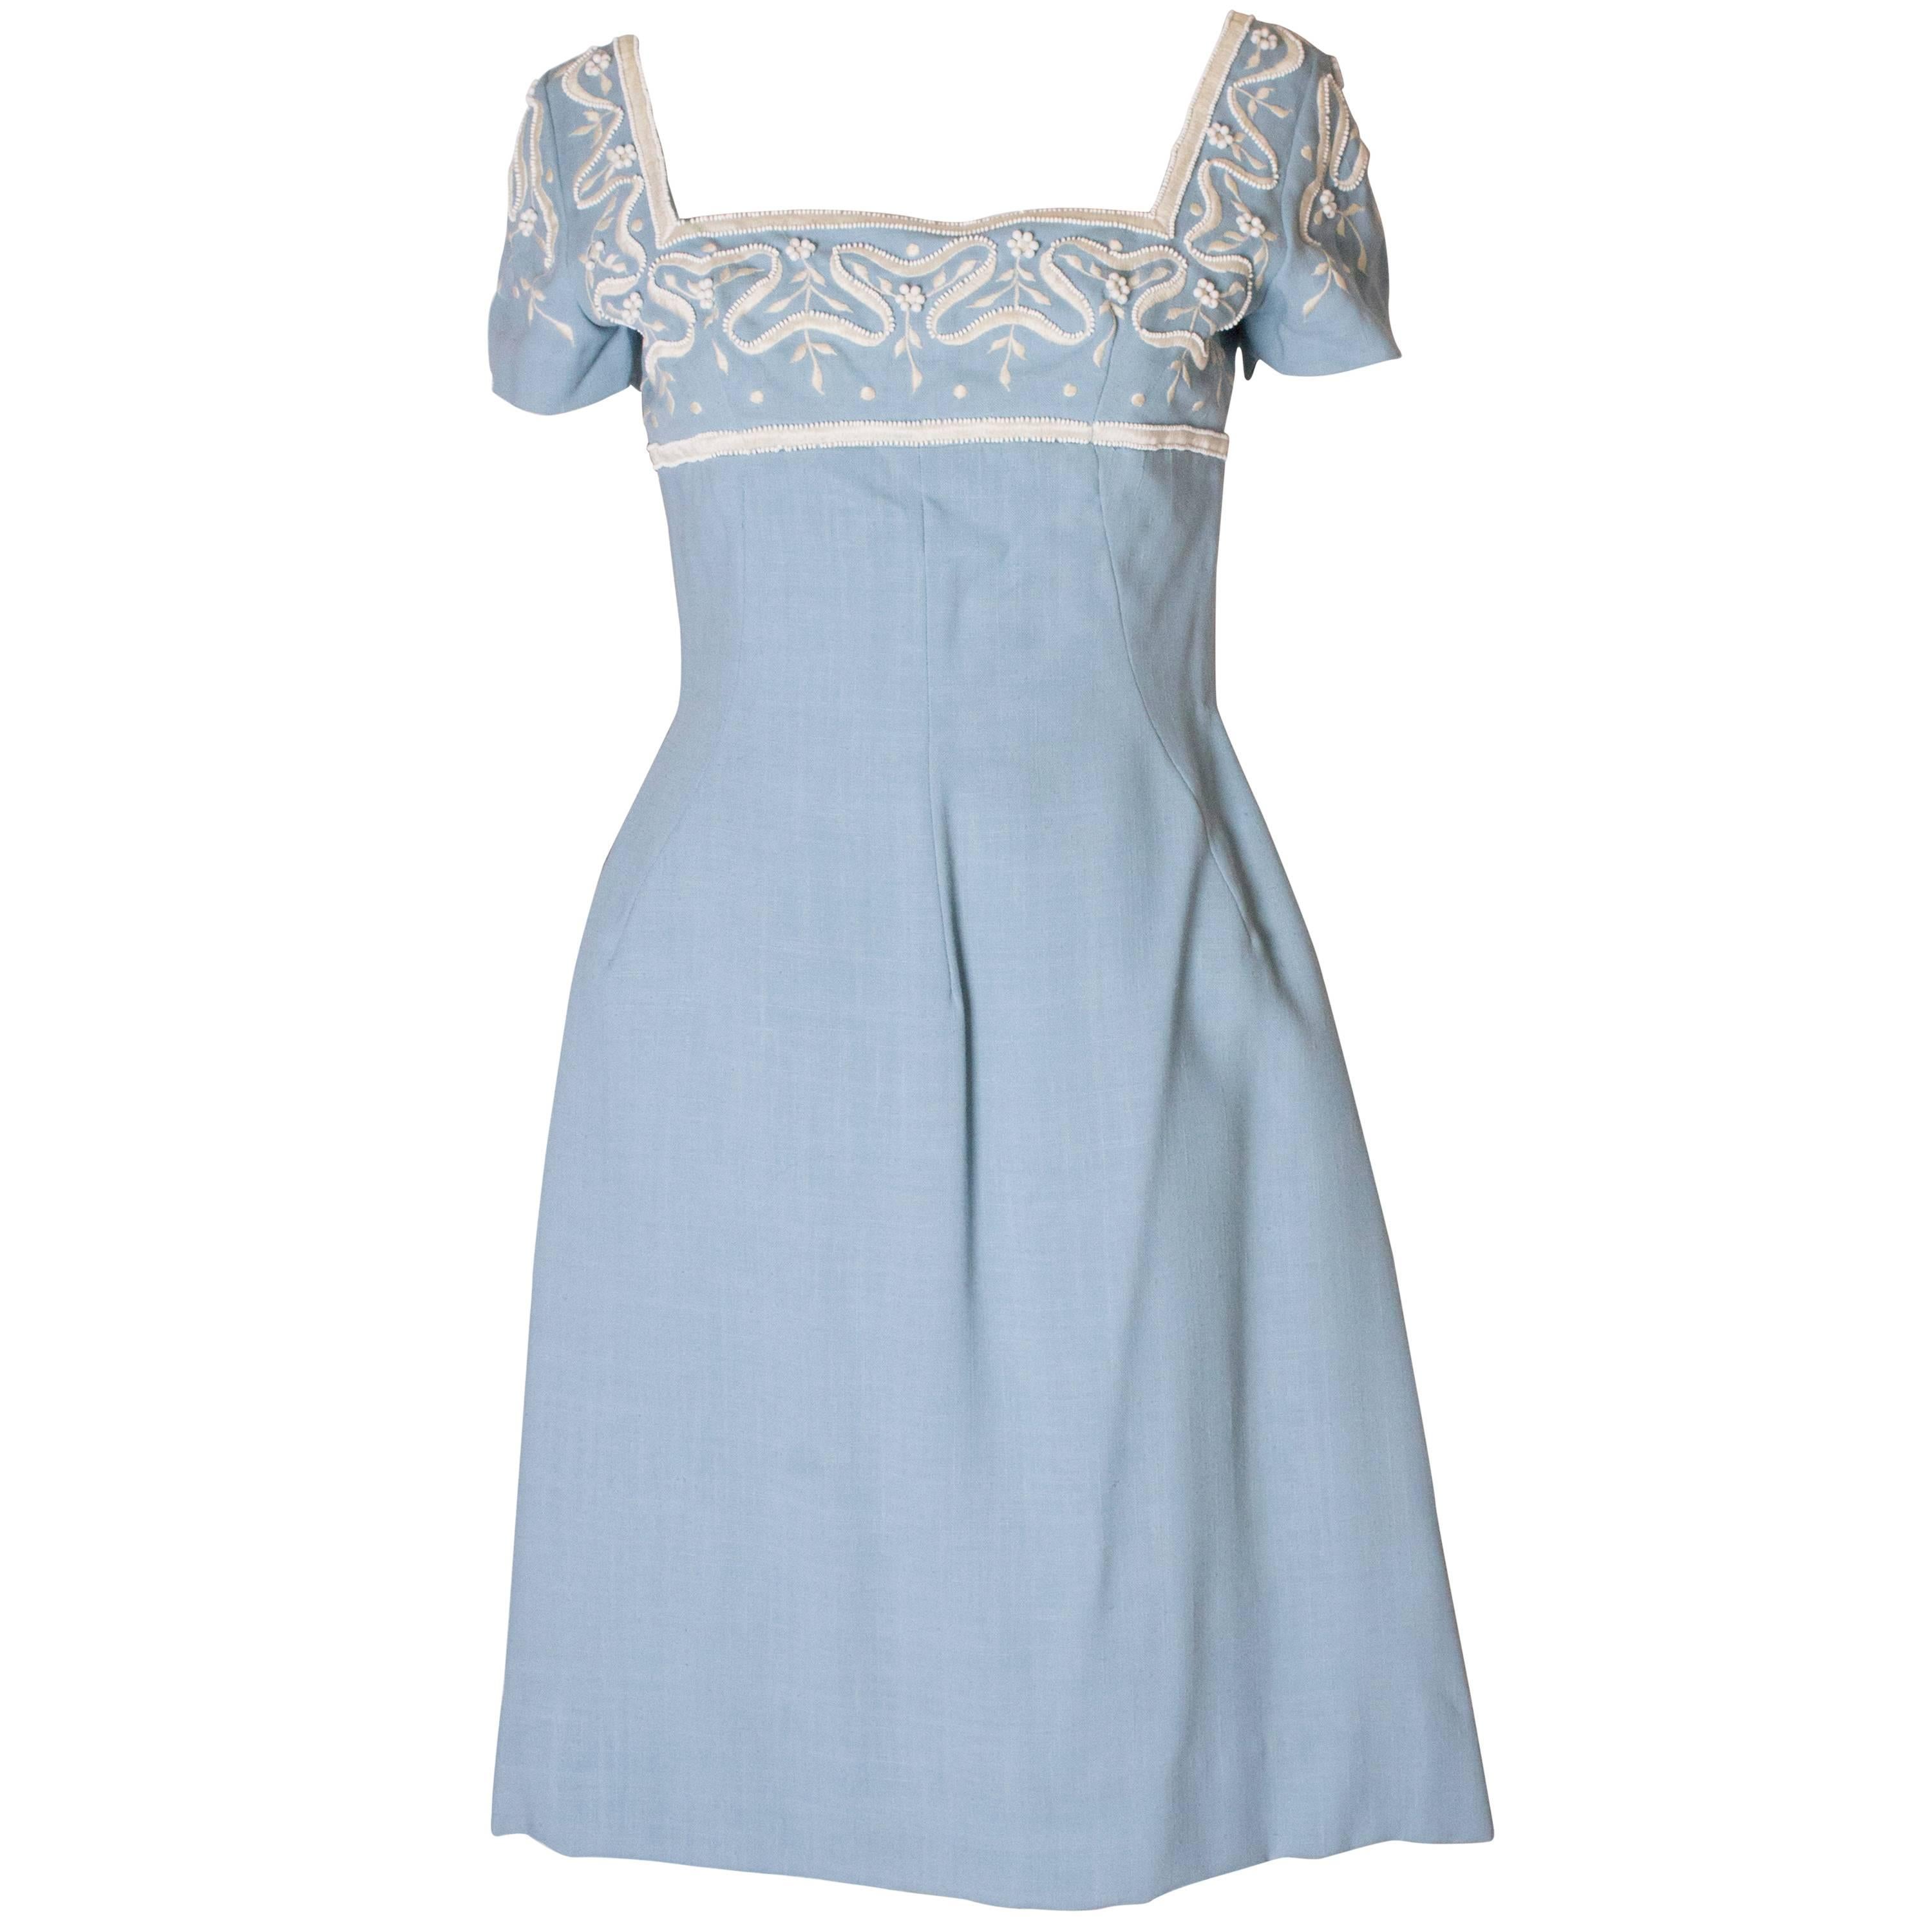 A Vintage 1960s pale blue cotton and beaded day dress by Jean Allen London 